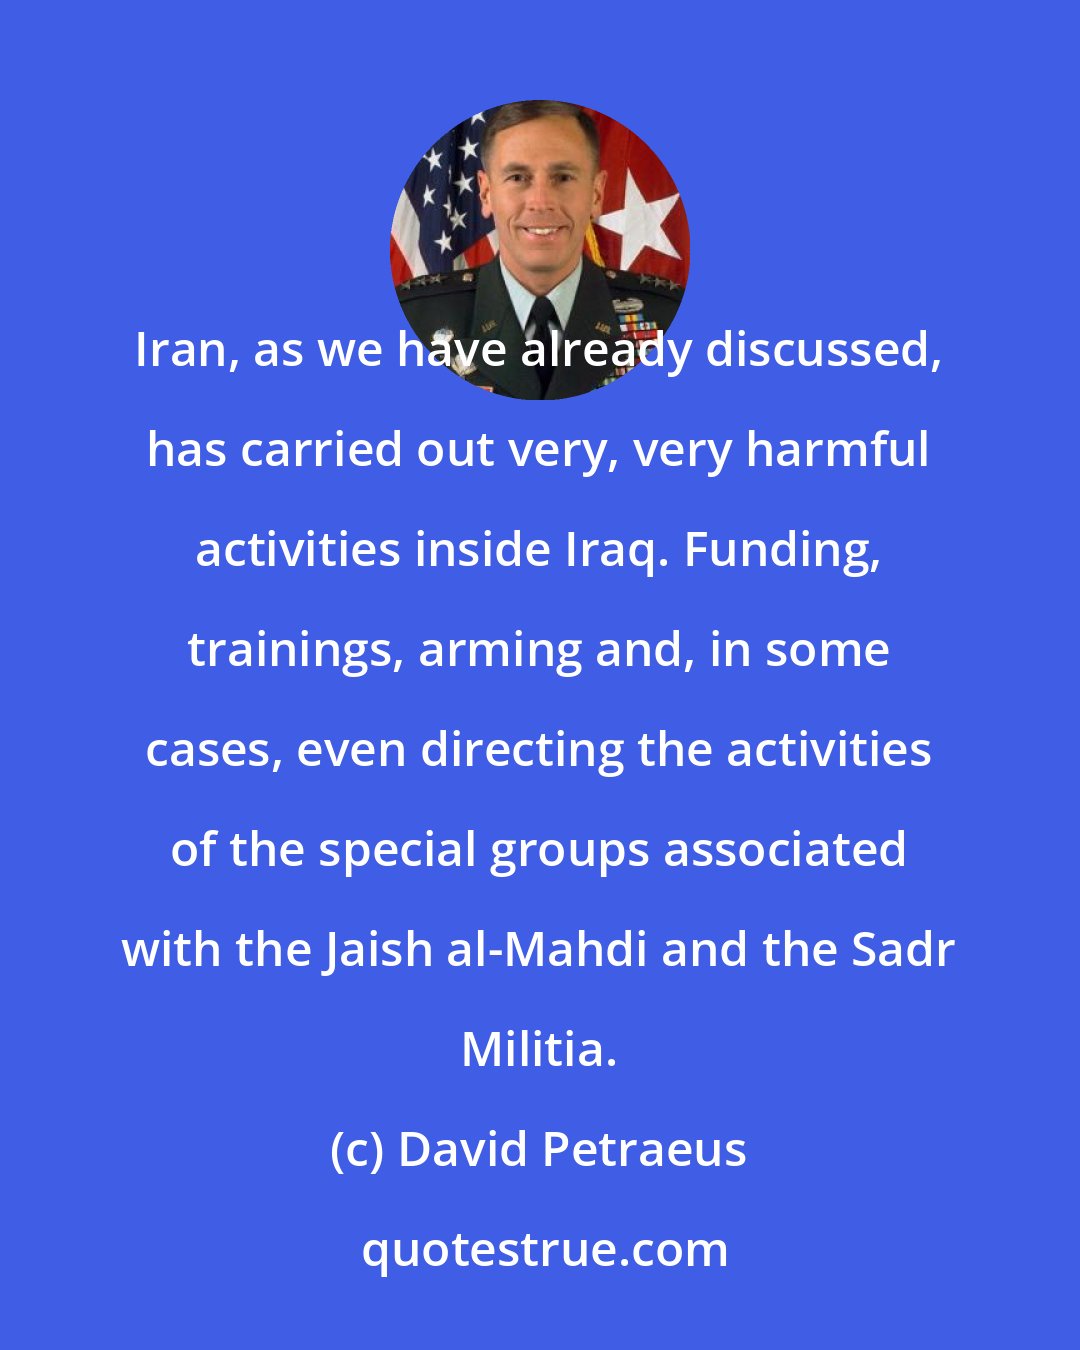 David Petraeus: Iran, as we have already discussed, has carried out very, very harmful activities inside Iraq. Funding, trainings, arming and, in some cases, even directing the activities of the special groups associated with the Jaish al-Mahdi and the Sadr Militia.